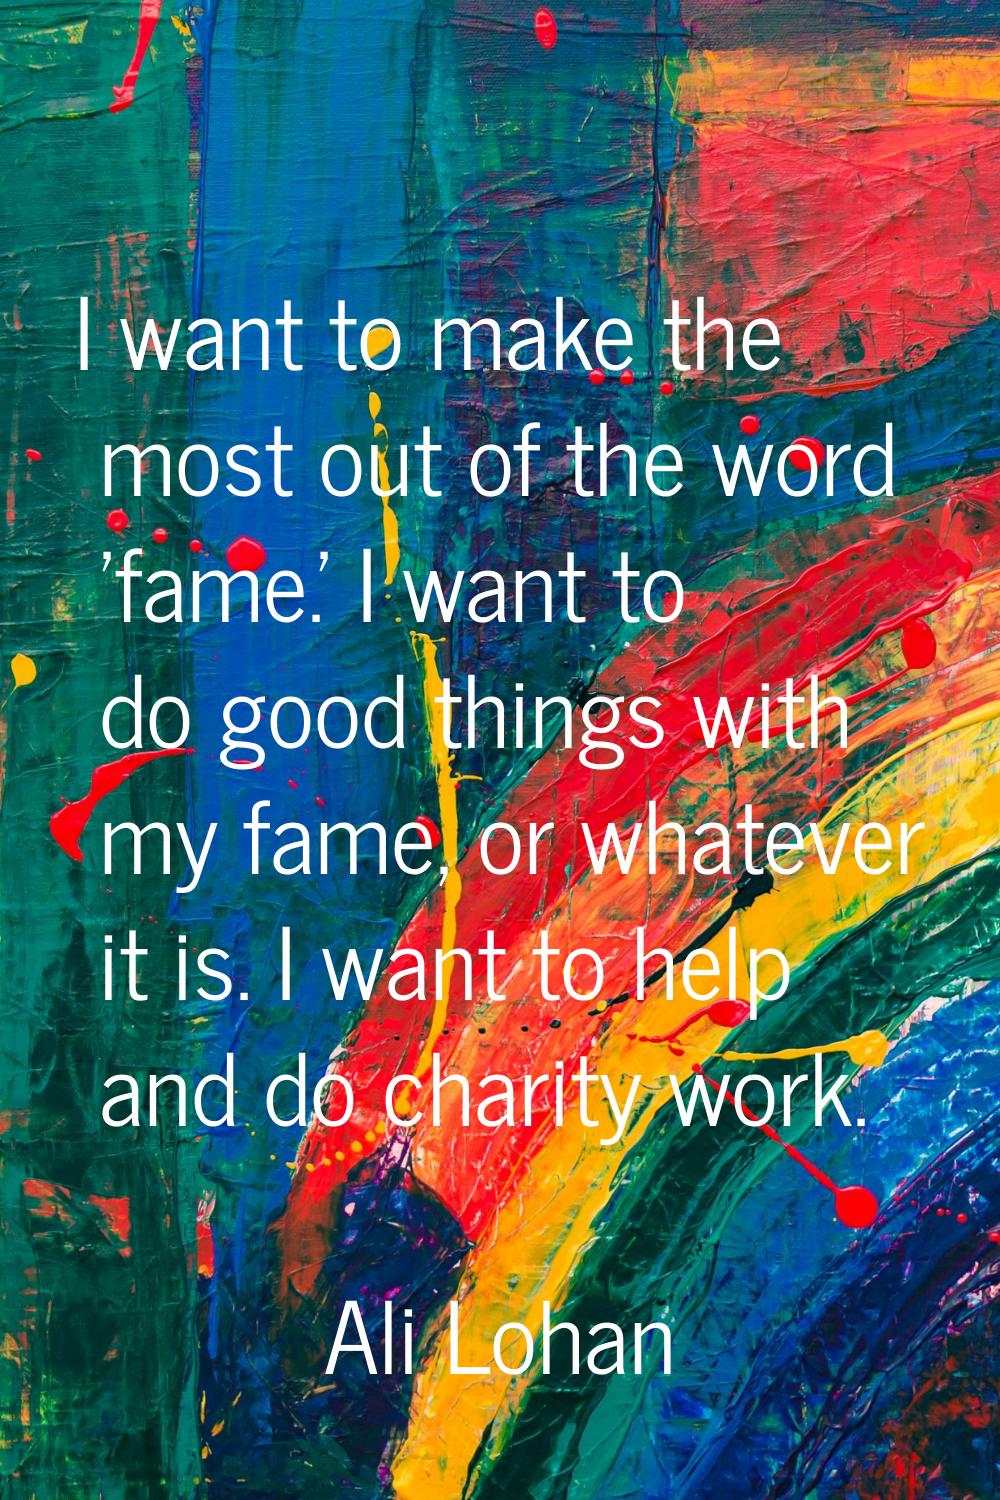 I want to make the most out of the word 'fame.' I want to do good things with my fame, or whatever 